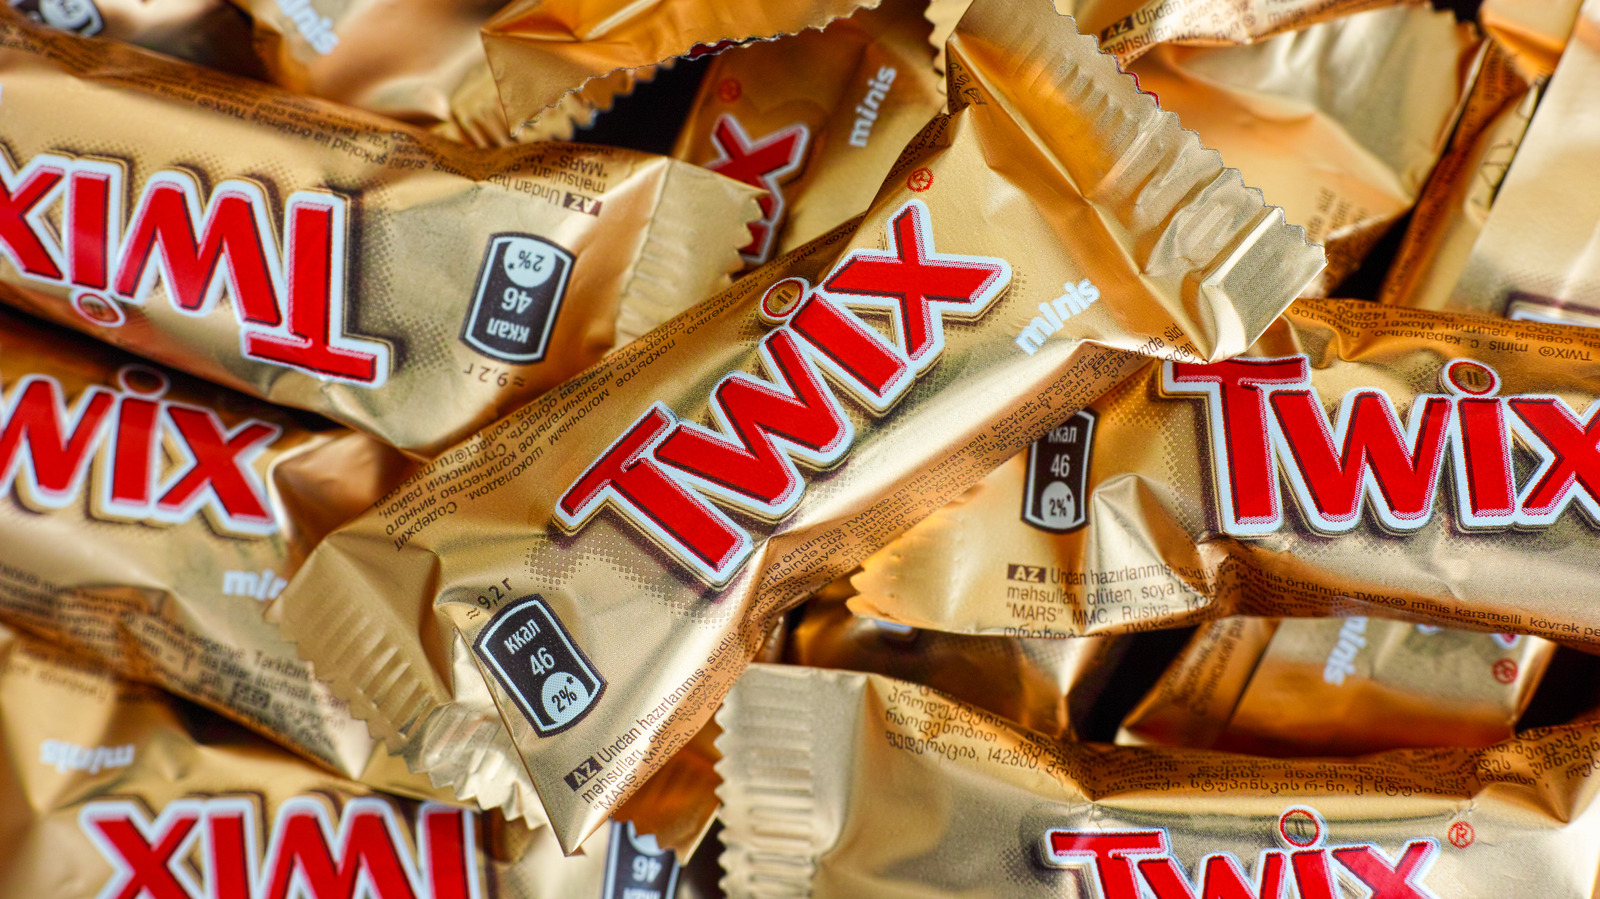 You Can Now Buy A Twix Seasoning Blend At Sam's Club